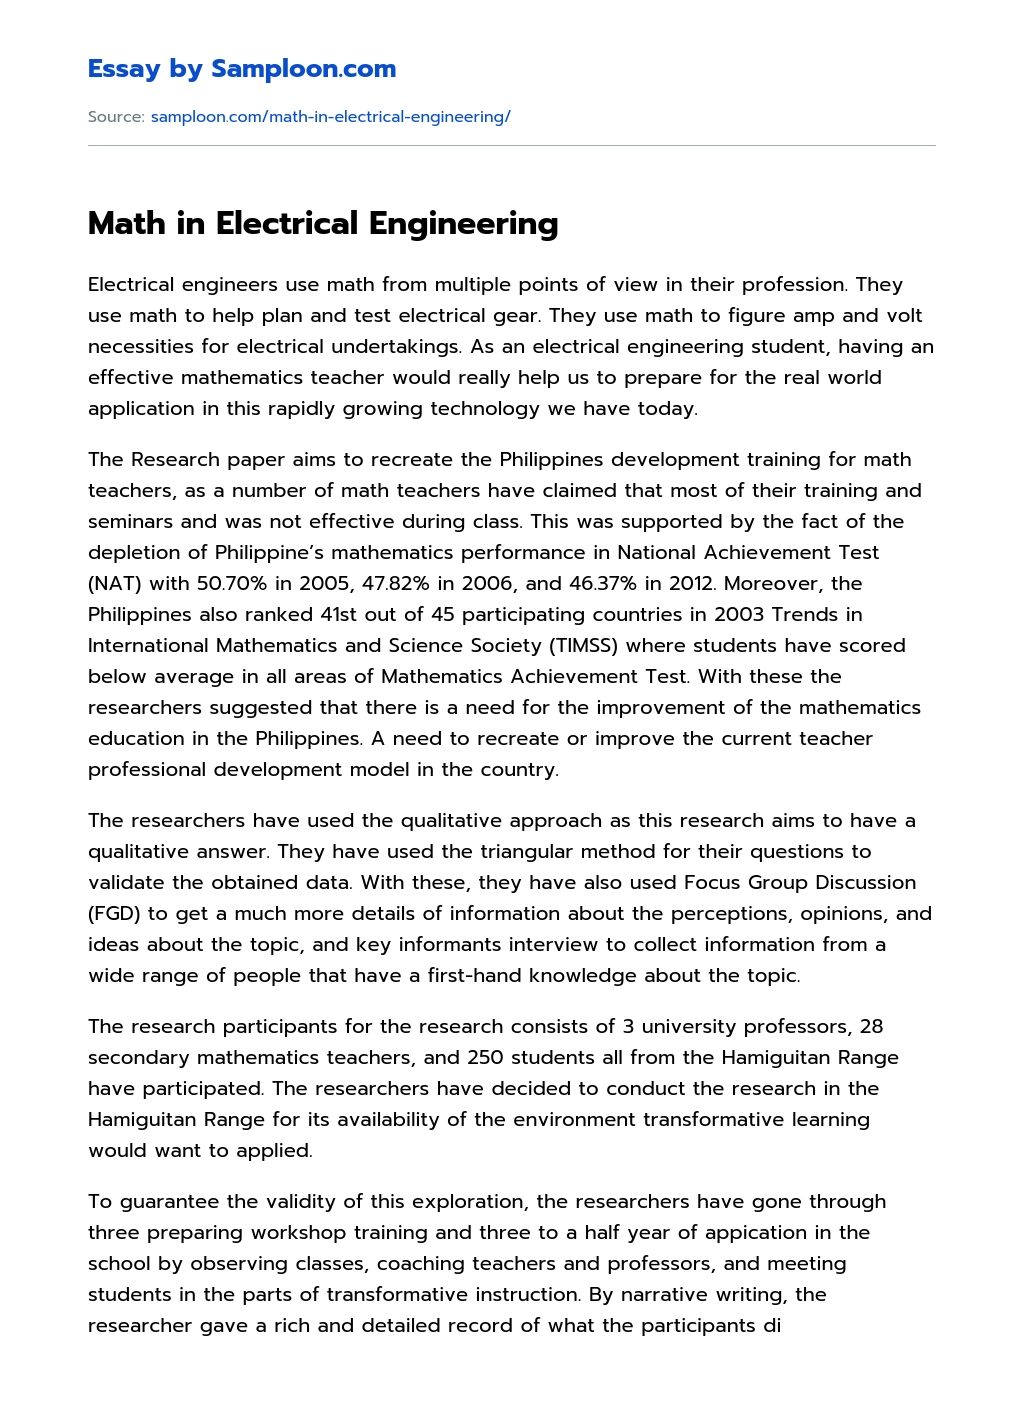 Math in Electrical Engineering Application essay